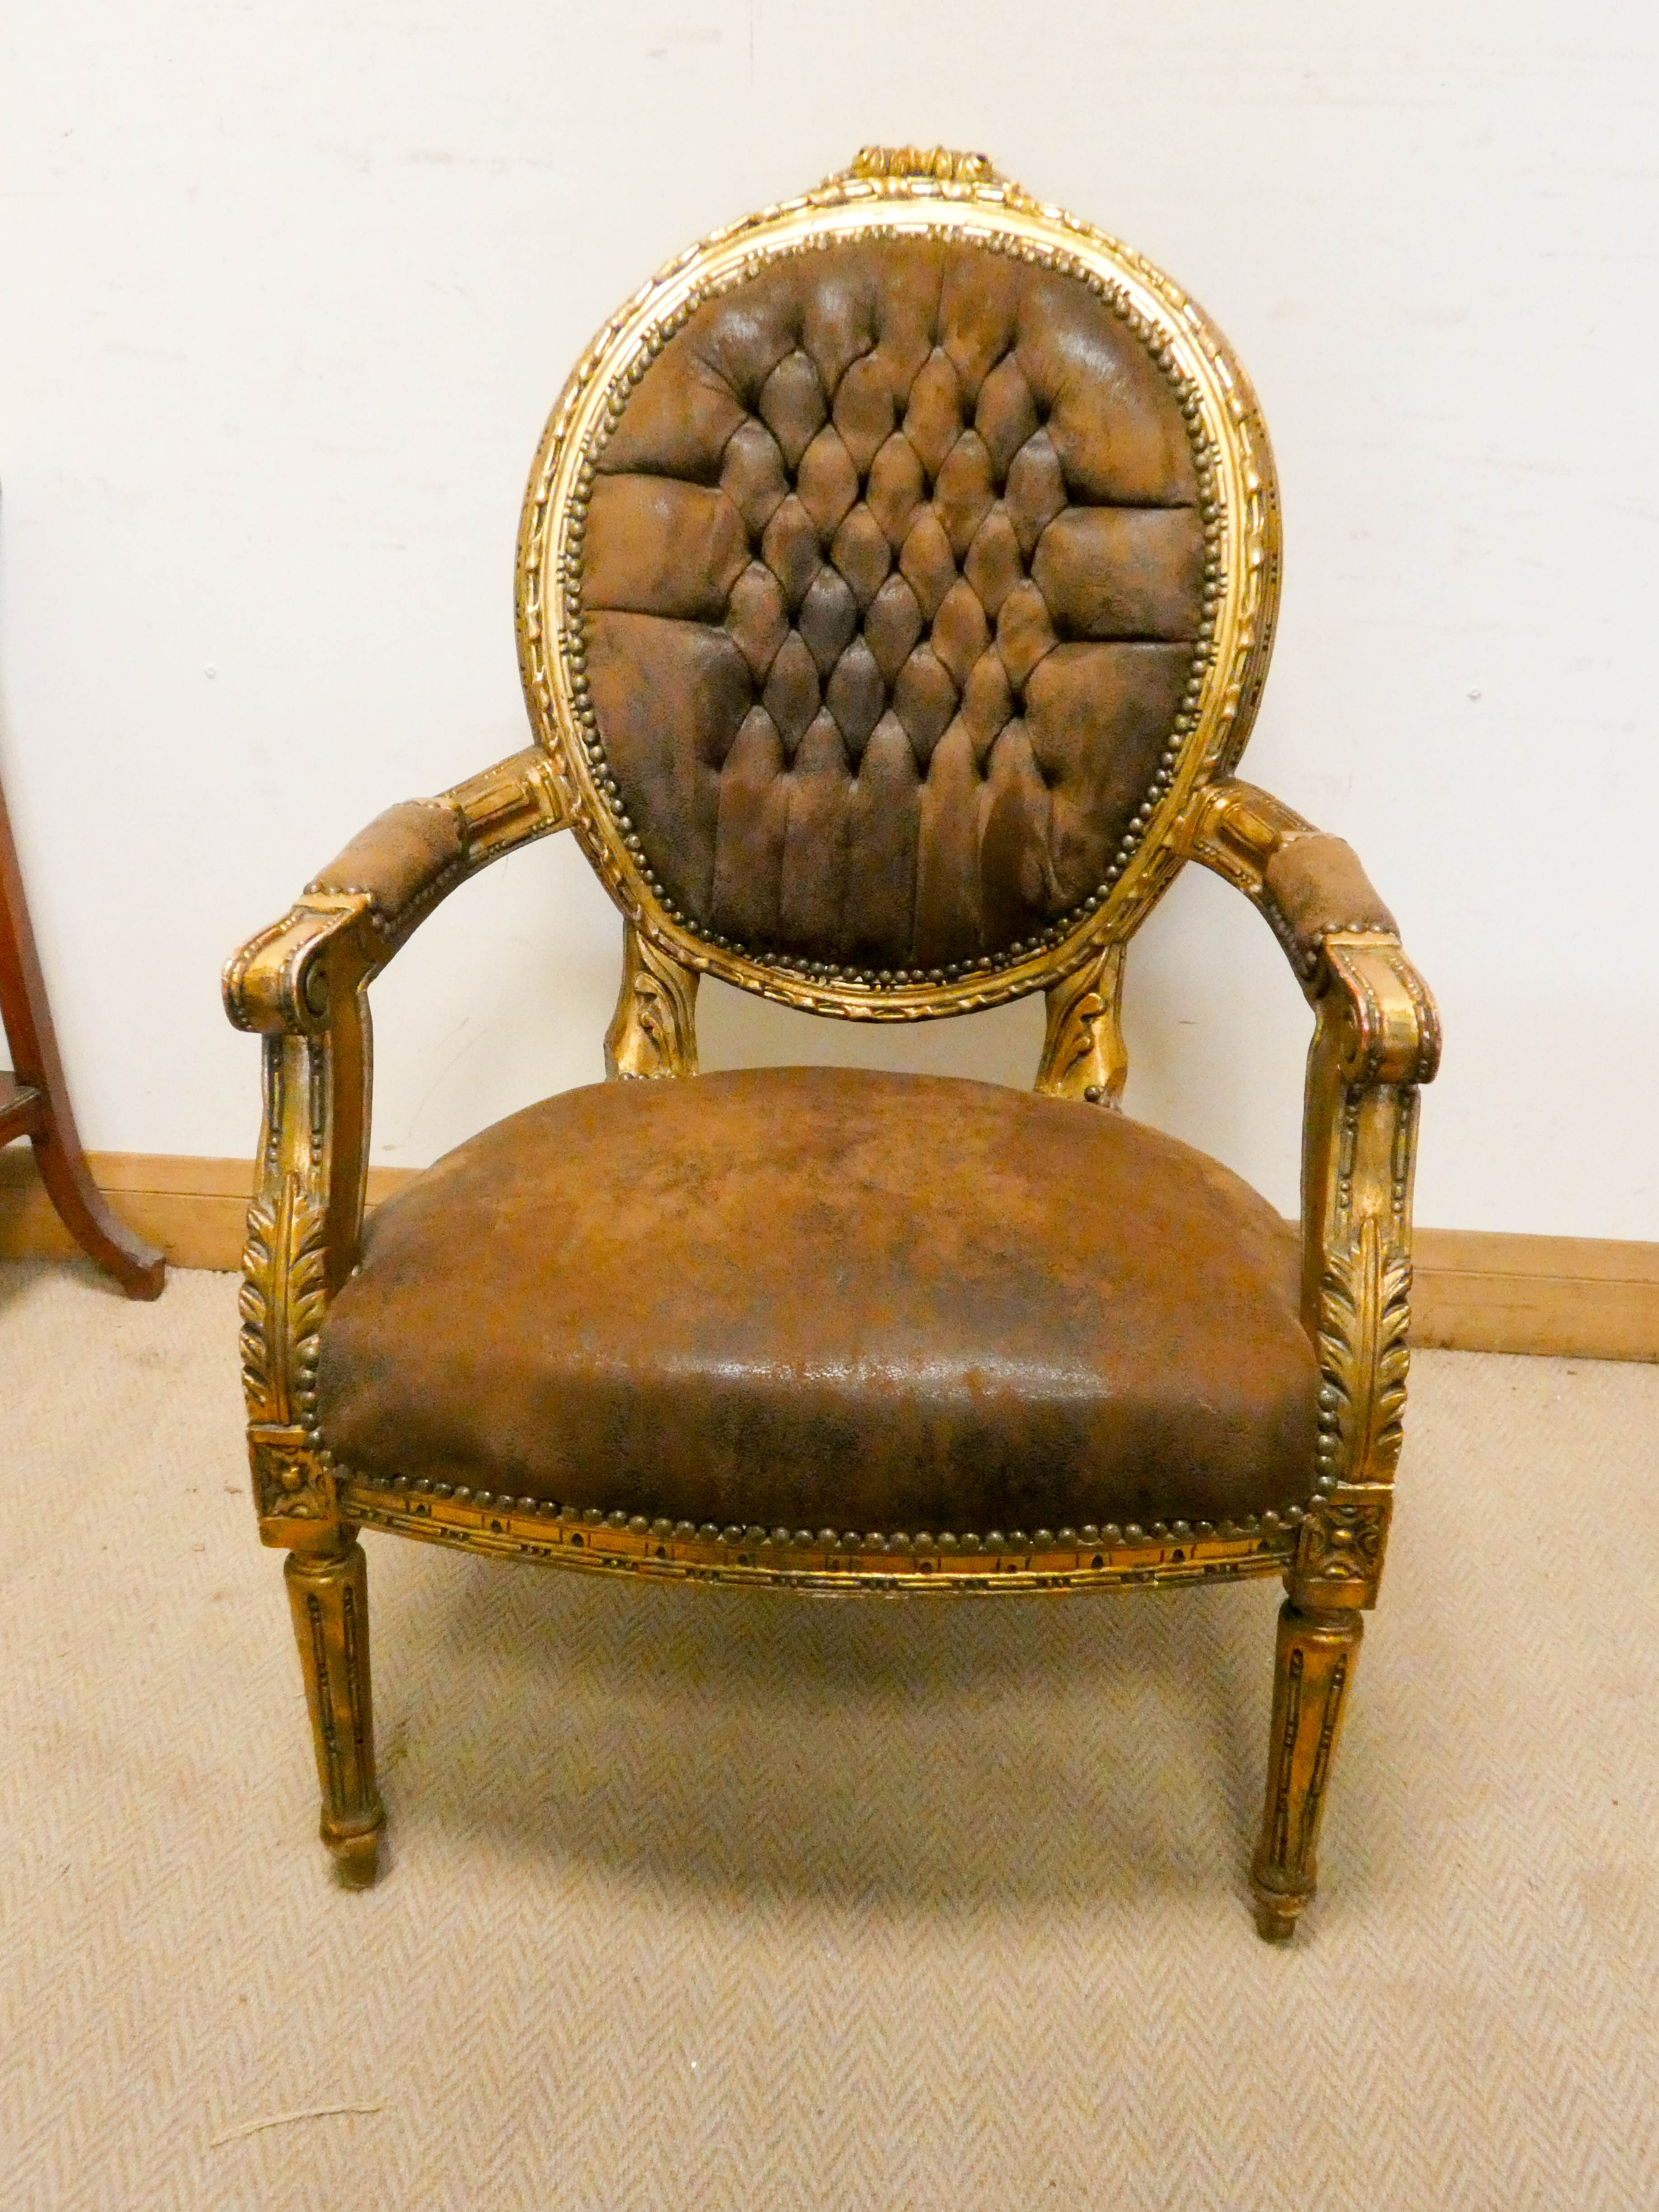 A French gilt framed elbow chair with brown leather upholstered seat and buttoned leather back